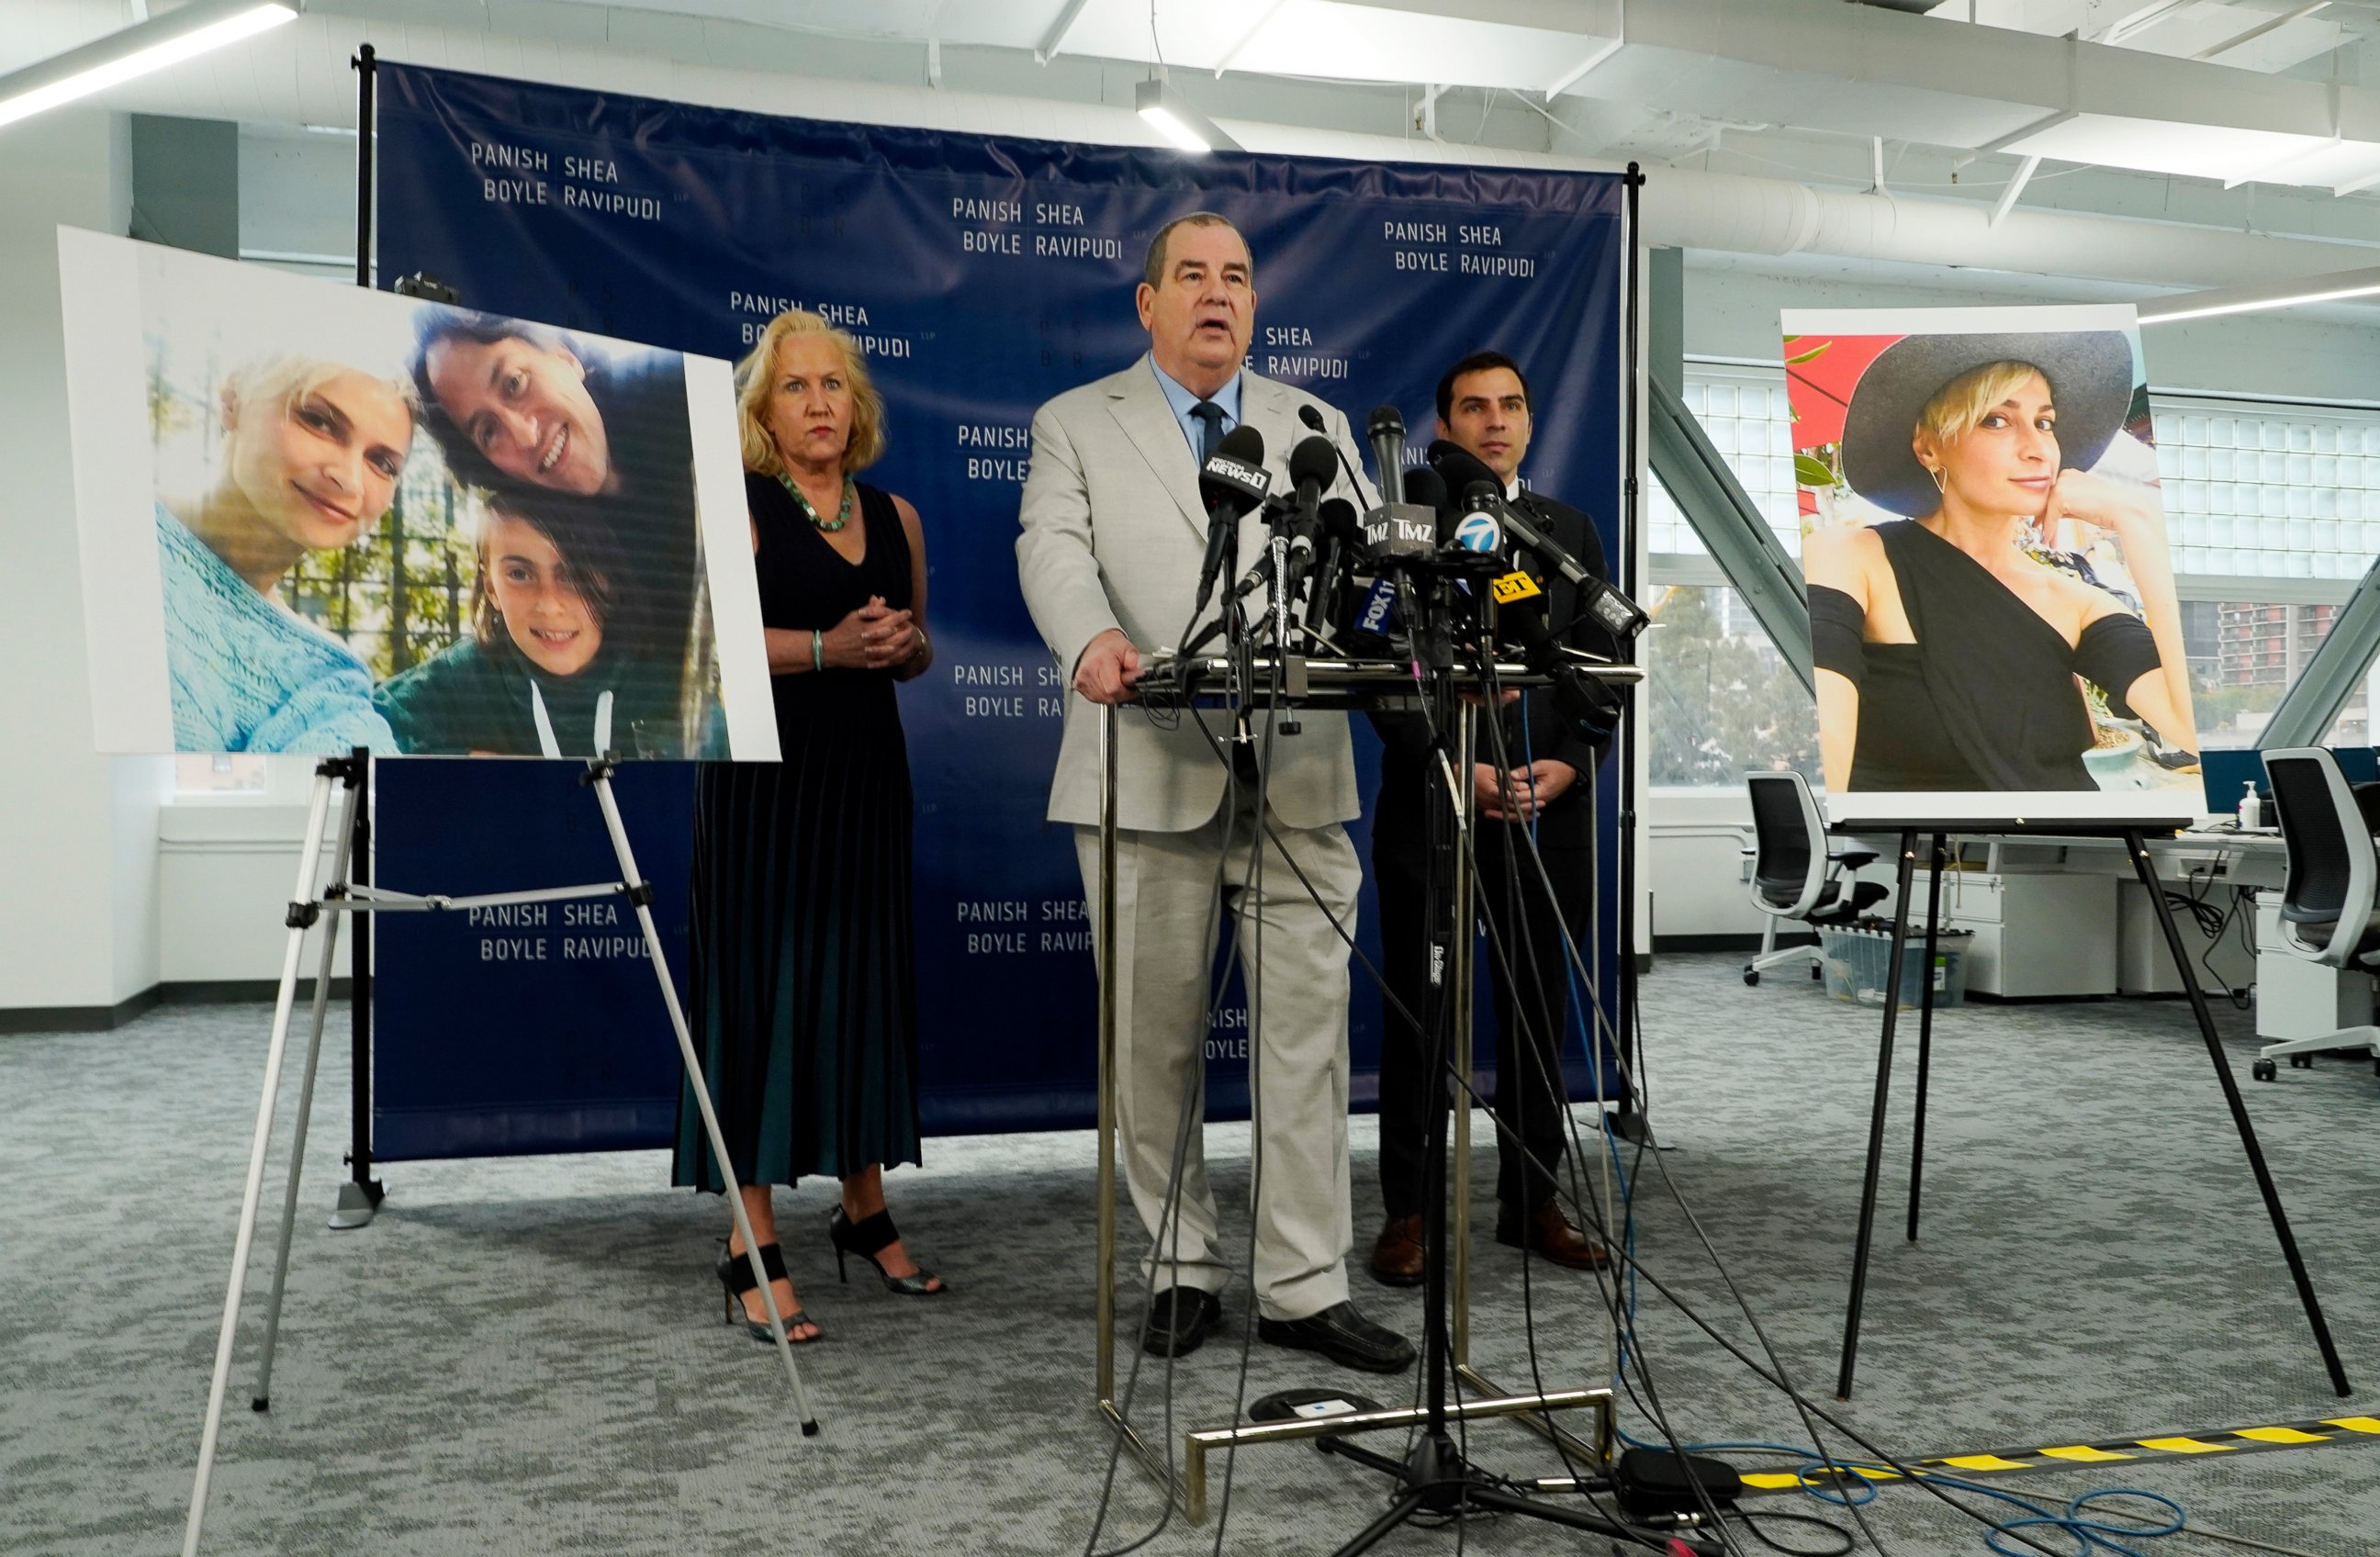 PHOTO: Randi McGinn, from left, Brian Panish and Jesse Creed, attorneys for the family of cinematographer Halyna Hutchins, take part in a news conference alongside portraits of Hutchins and her family, Feb. 15, 2022, in Los Angeles.